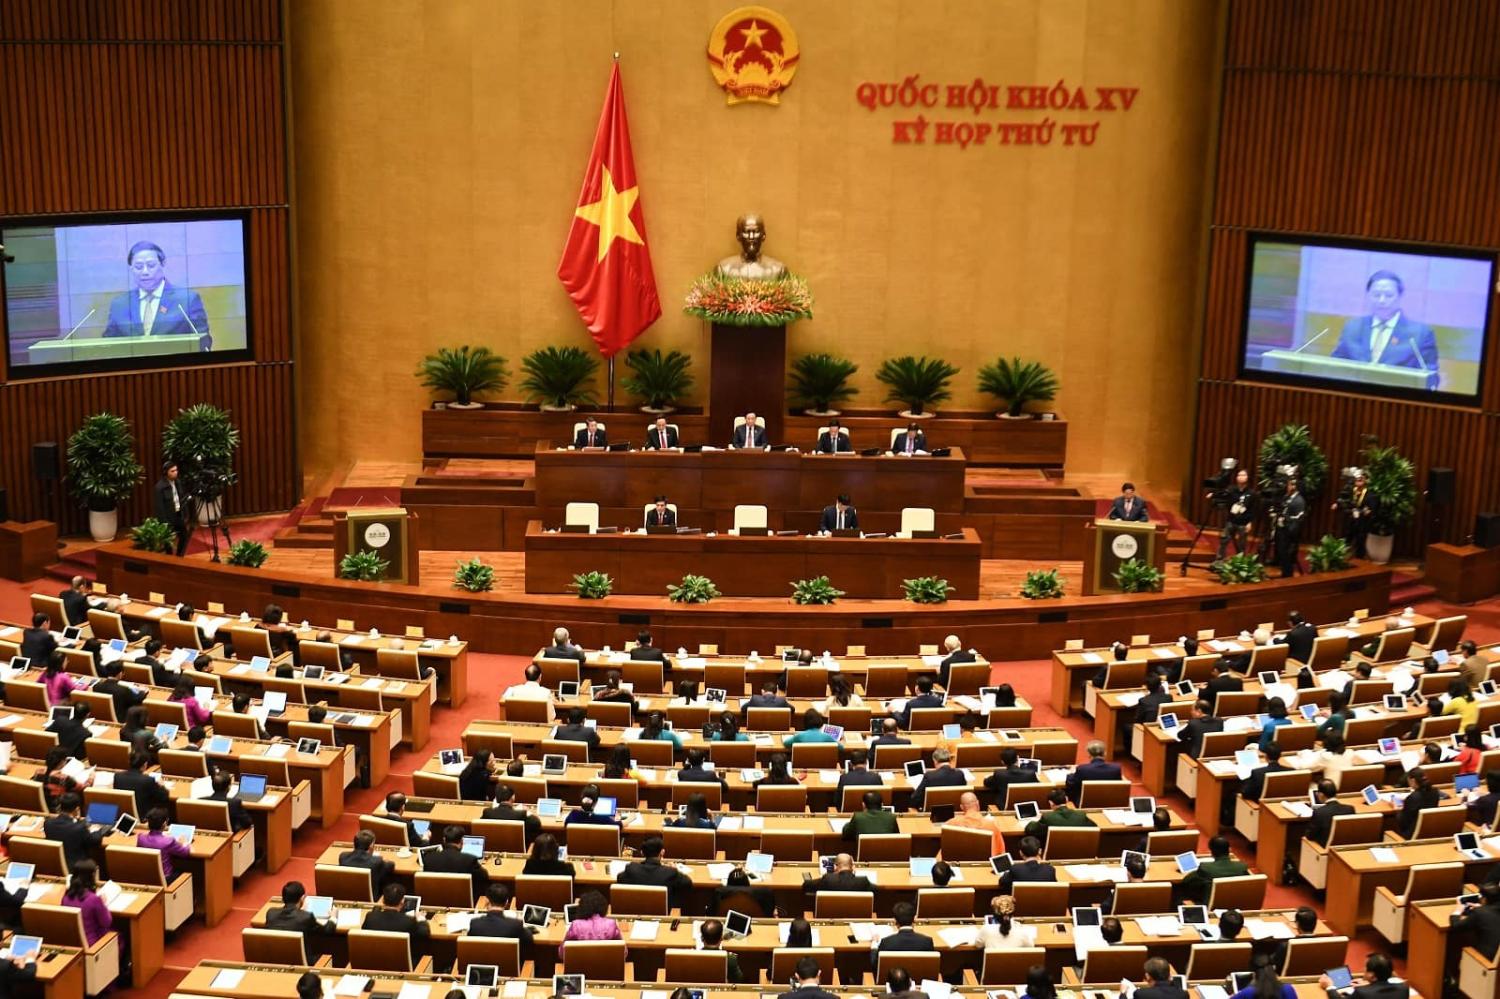 Vietnam’s parliament, the National Assembly, at its autumn session in Hanoi, 20 October 2022 (Nhac Nguyen/AFP via Getty Images)